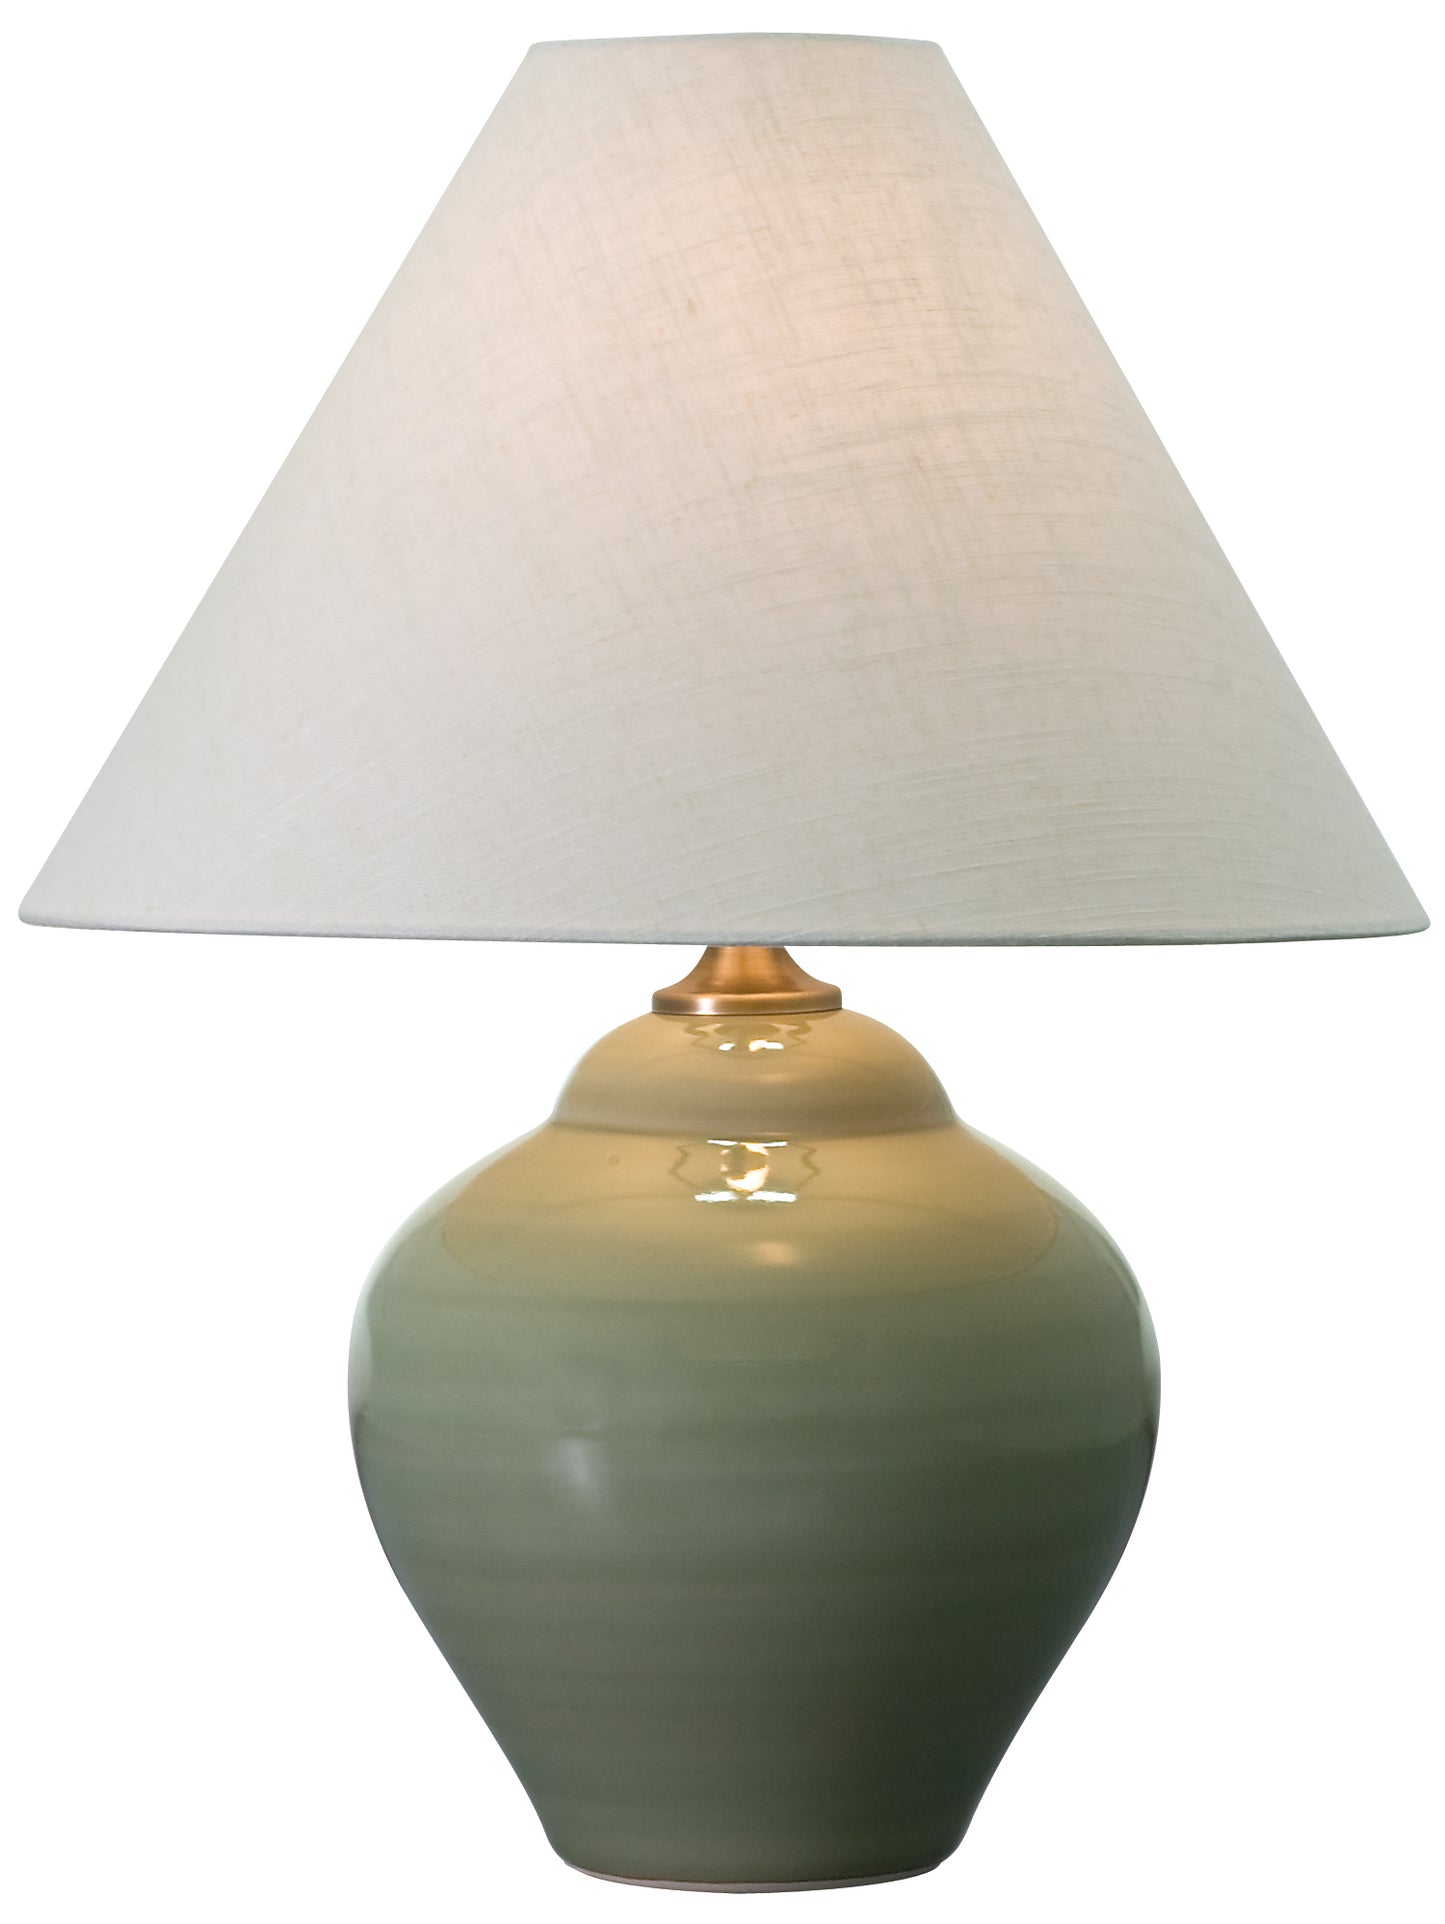 House of Troy Scatchard 21.5" Stoneware Table Lamp in Celadon GS130-CG